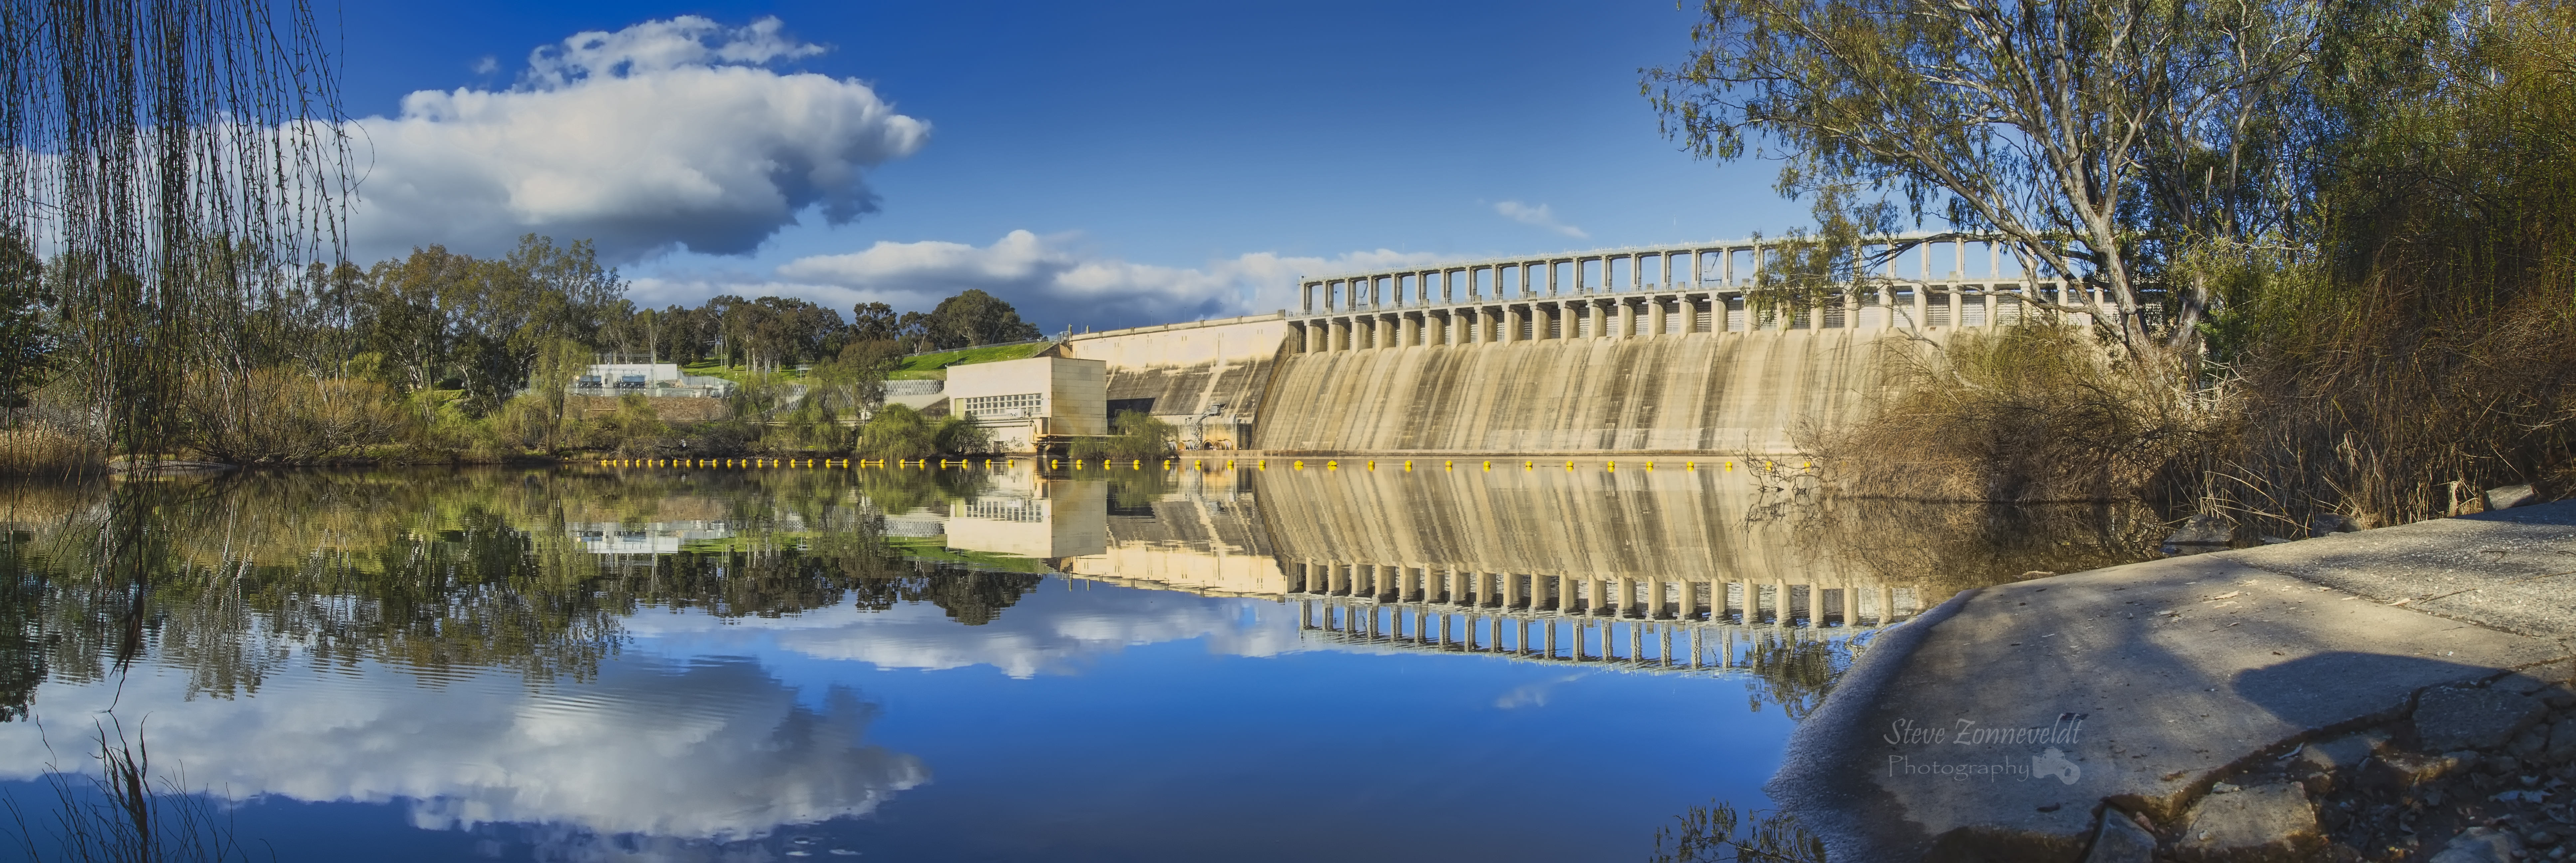 Murray River At The Hume Dam by djzontheball on DeviantArt